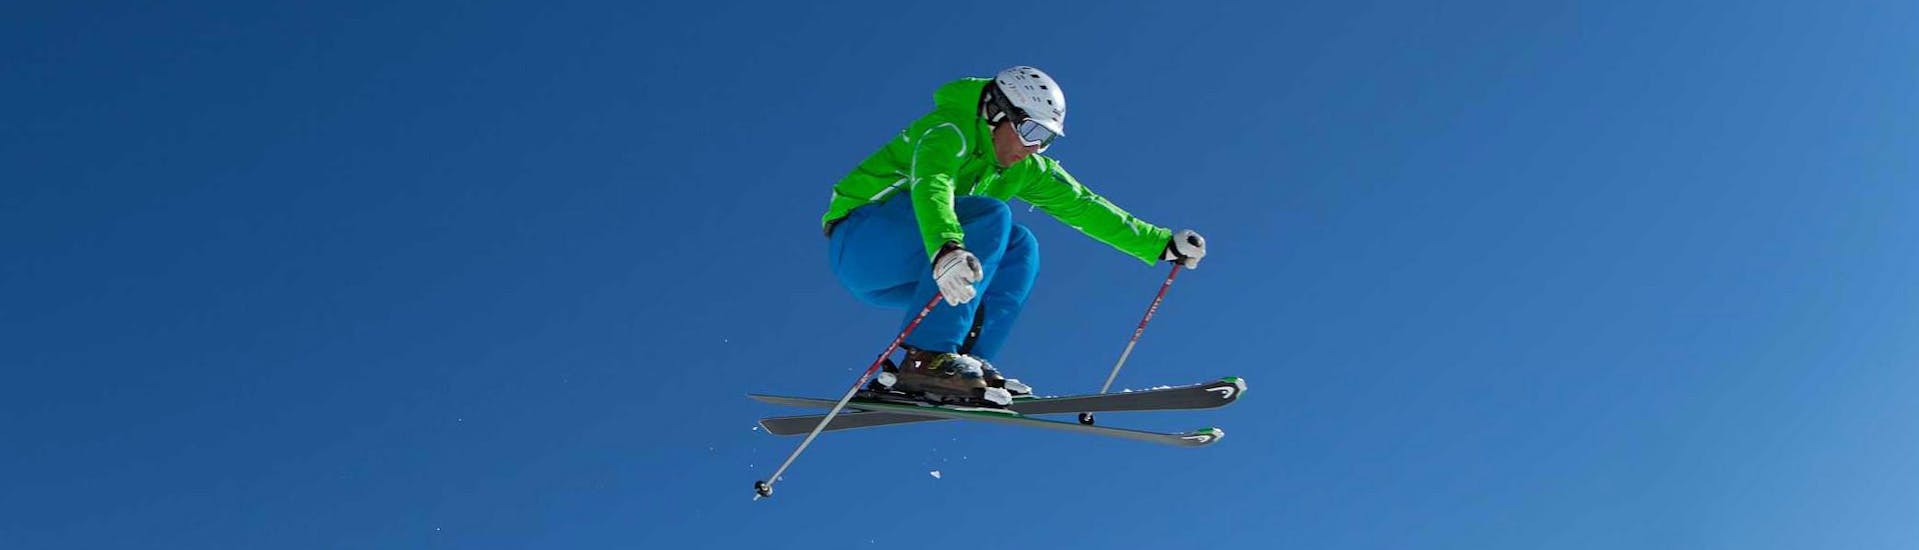 A skier flying through the air during private ski lessons for adults of all levels with ski school Ski Dome Viehhofen.